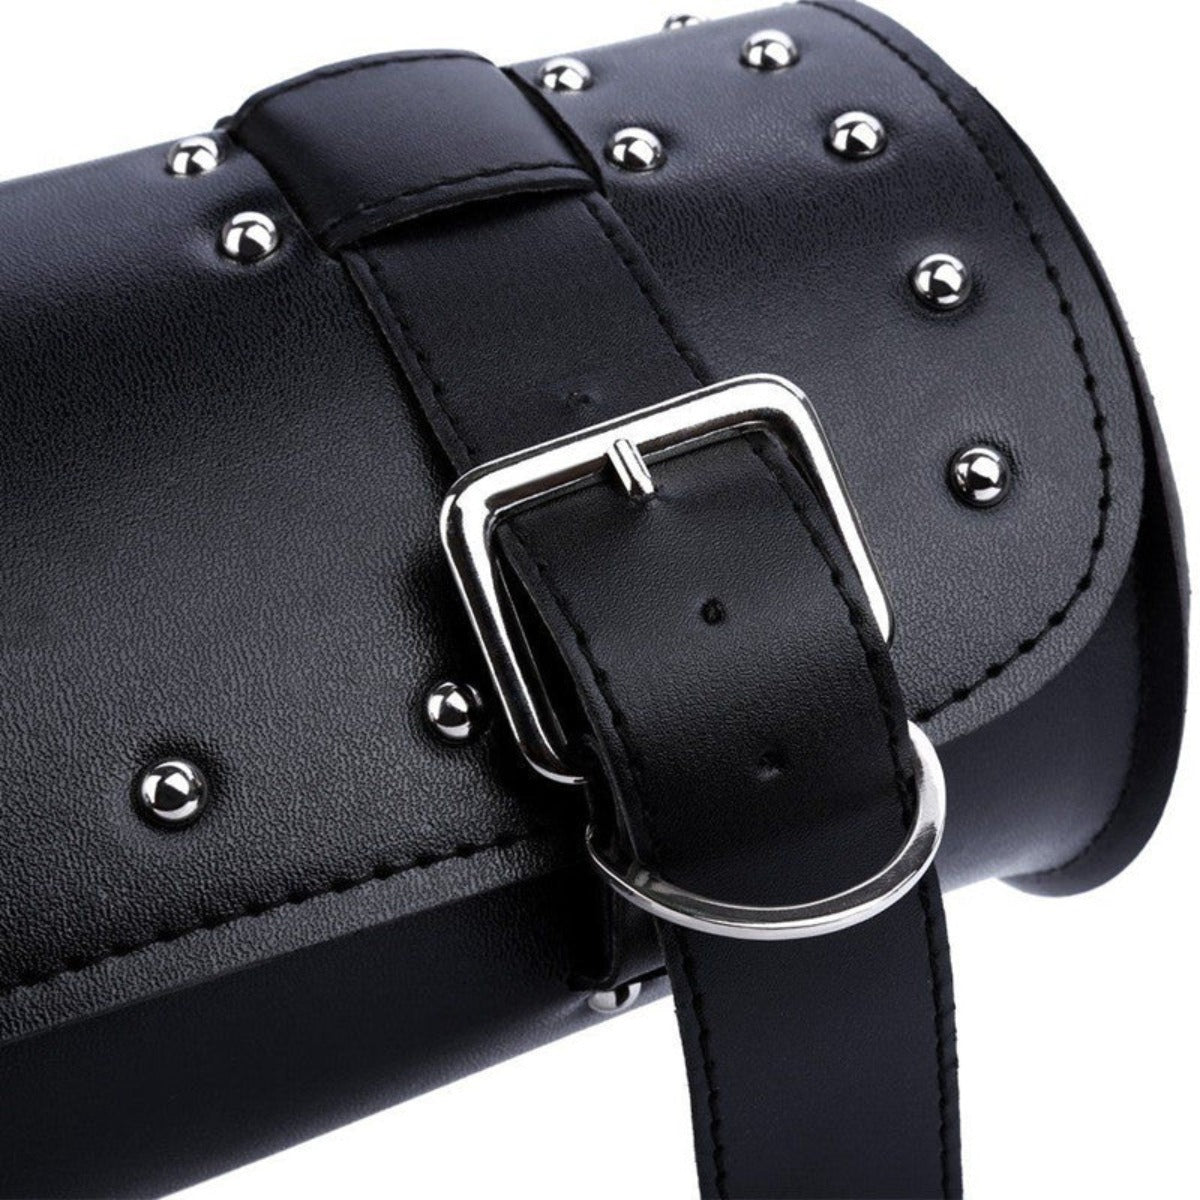 A black leather bag with studded straps, perfect as a Motorcycle Leather Duffle Roll Bag.